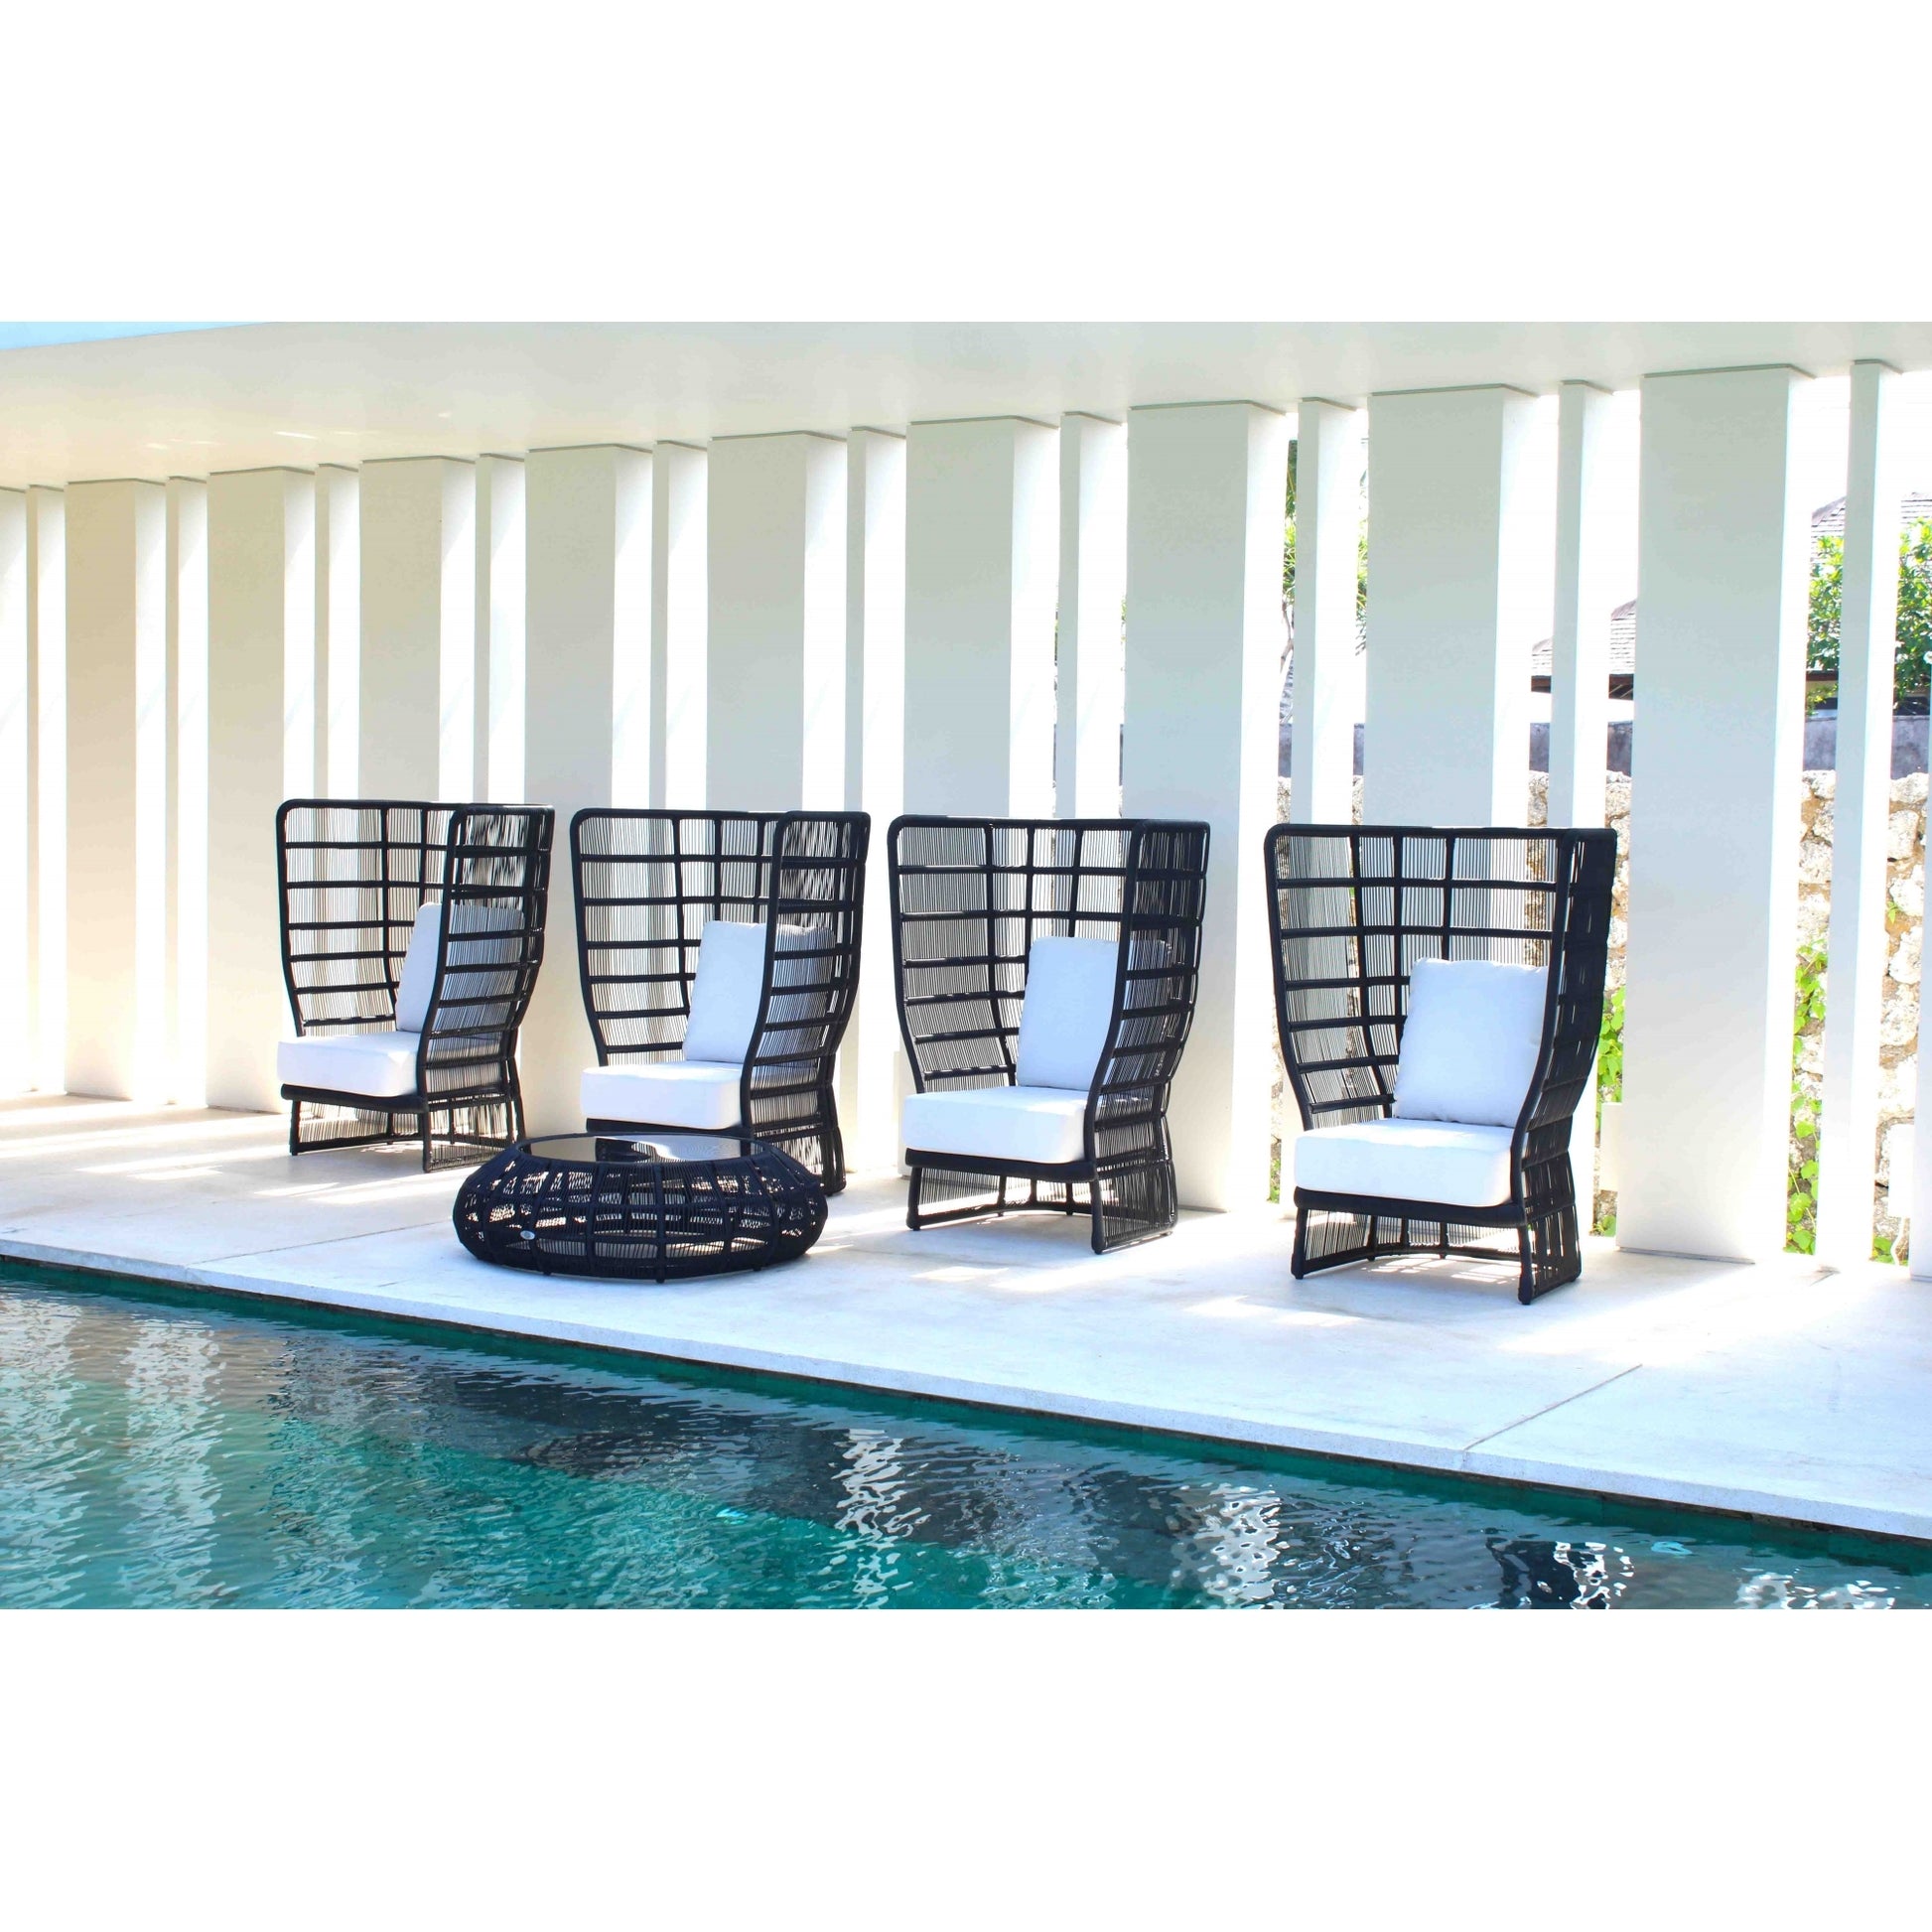 Spa Chair - PadioLiving - Spa Chair - Outdoor Chair - PadioLiving